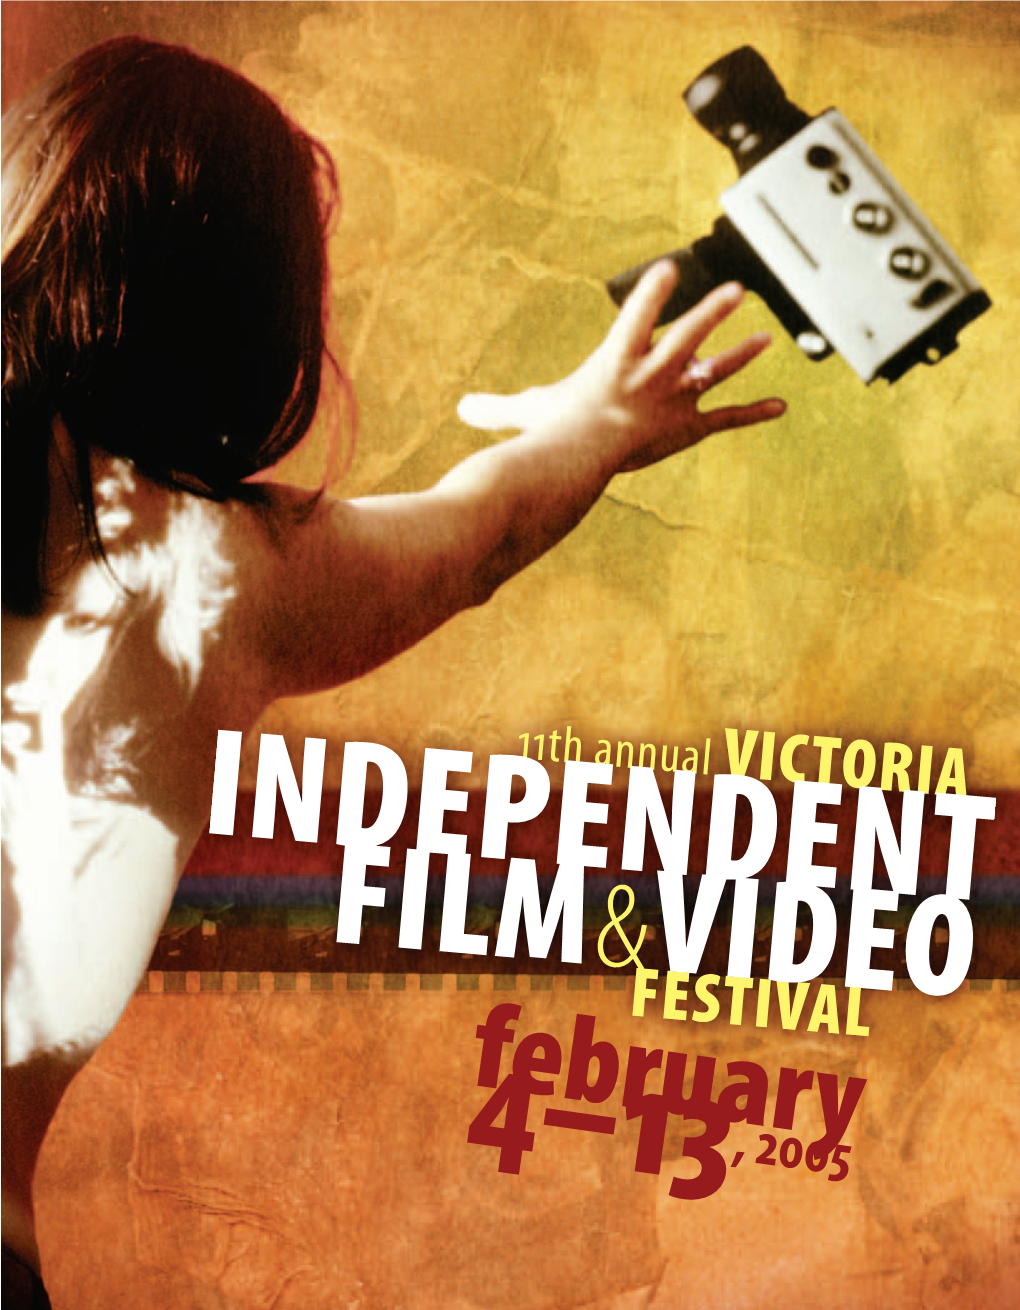 11Th Annual Victoria Independent Film & Video Festival Programme Guide